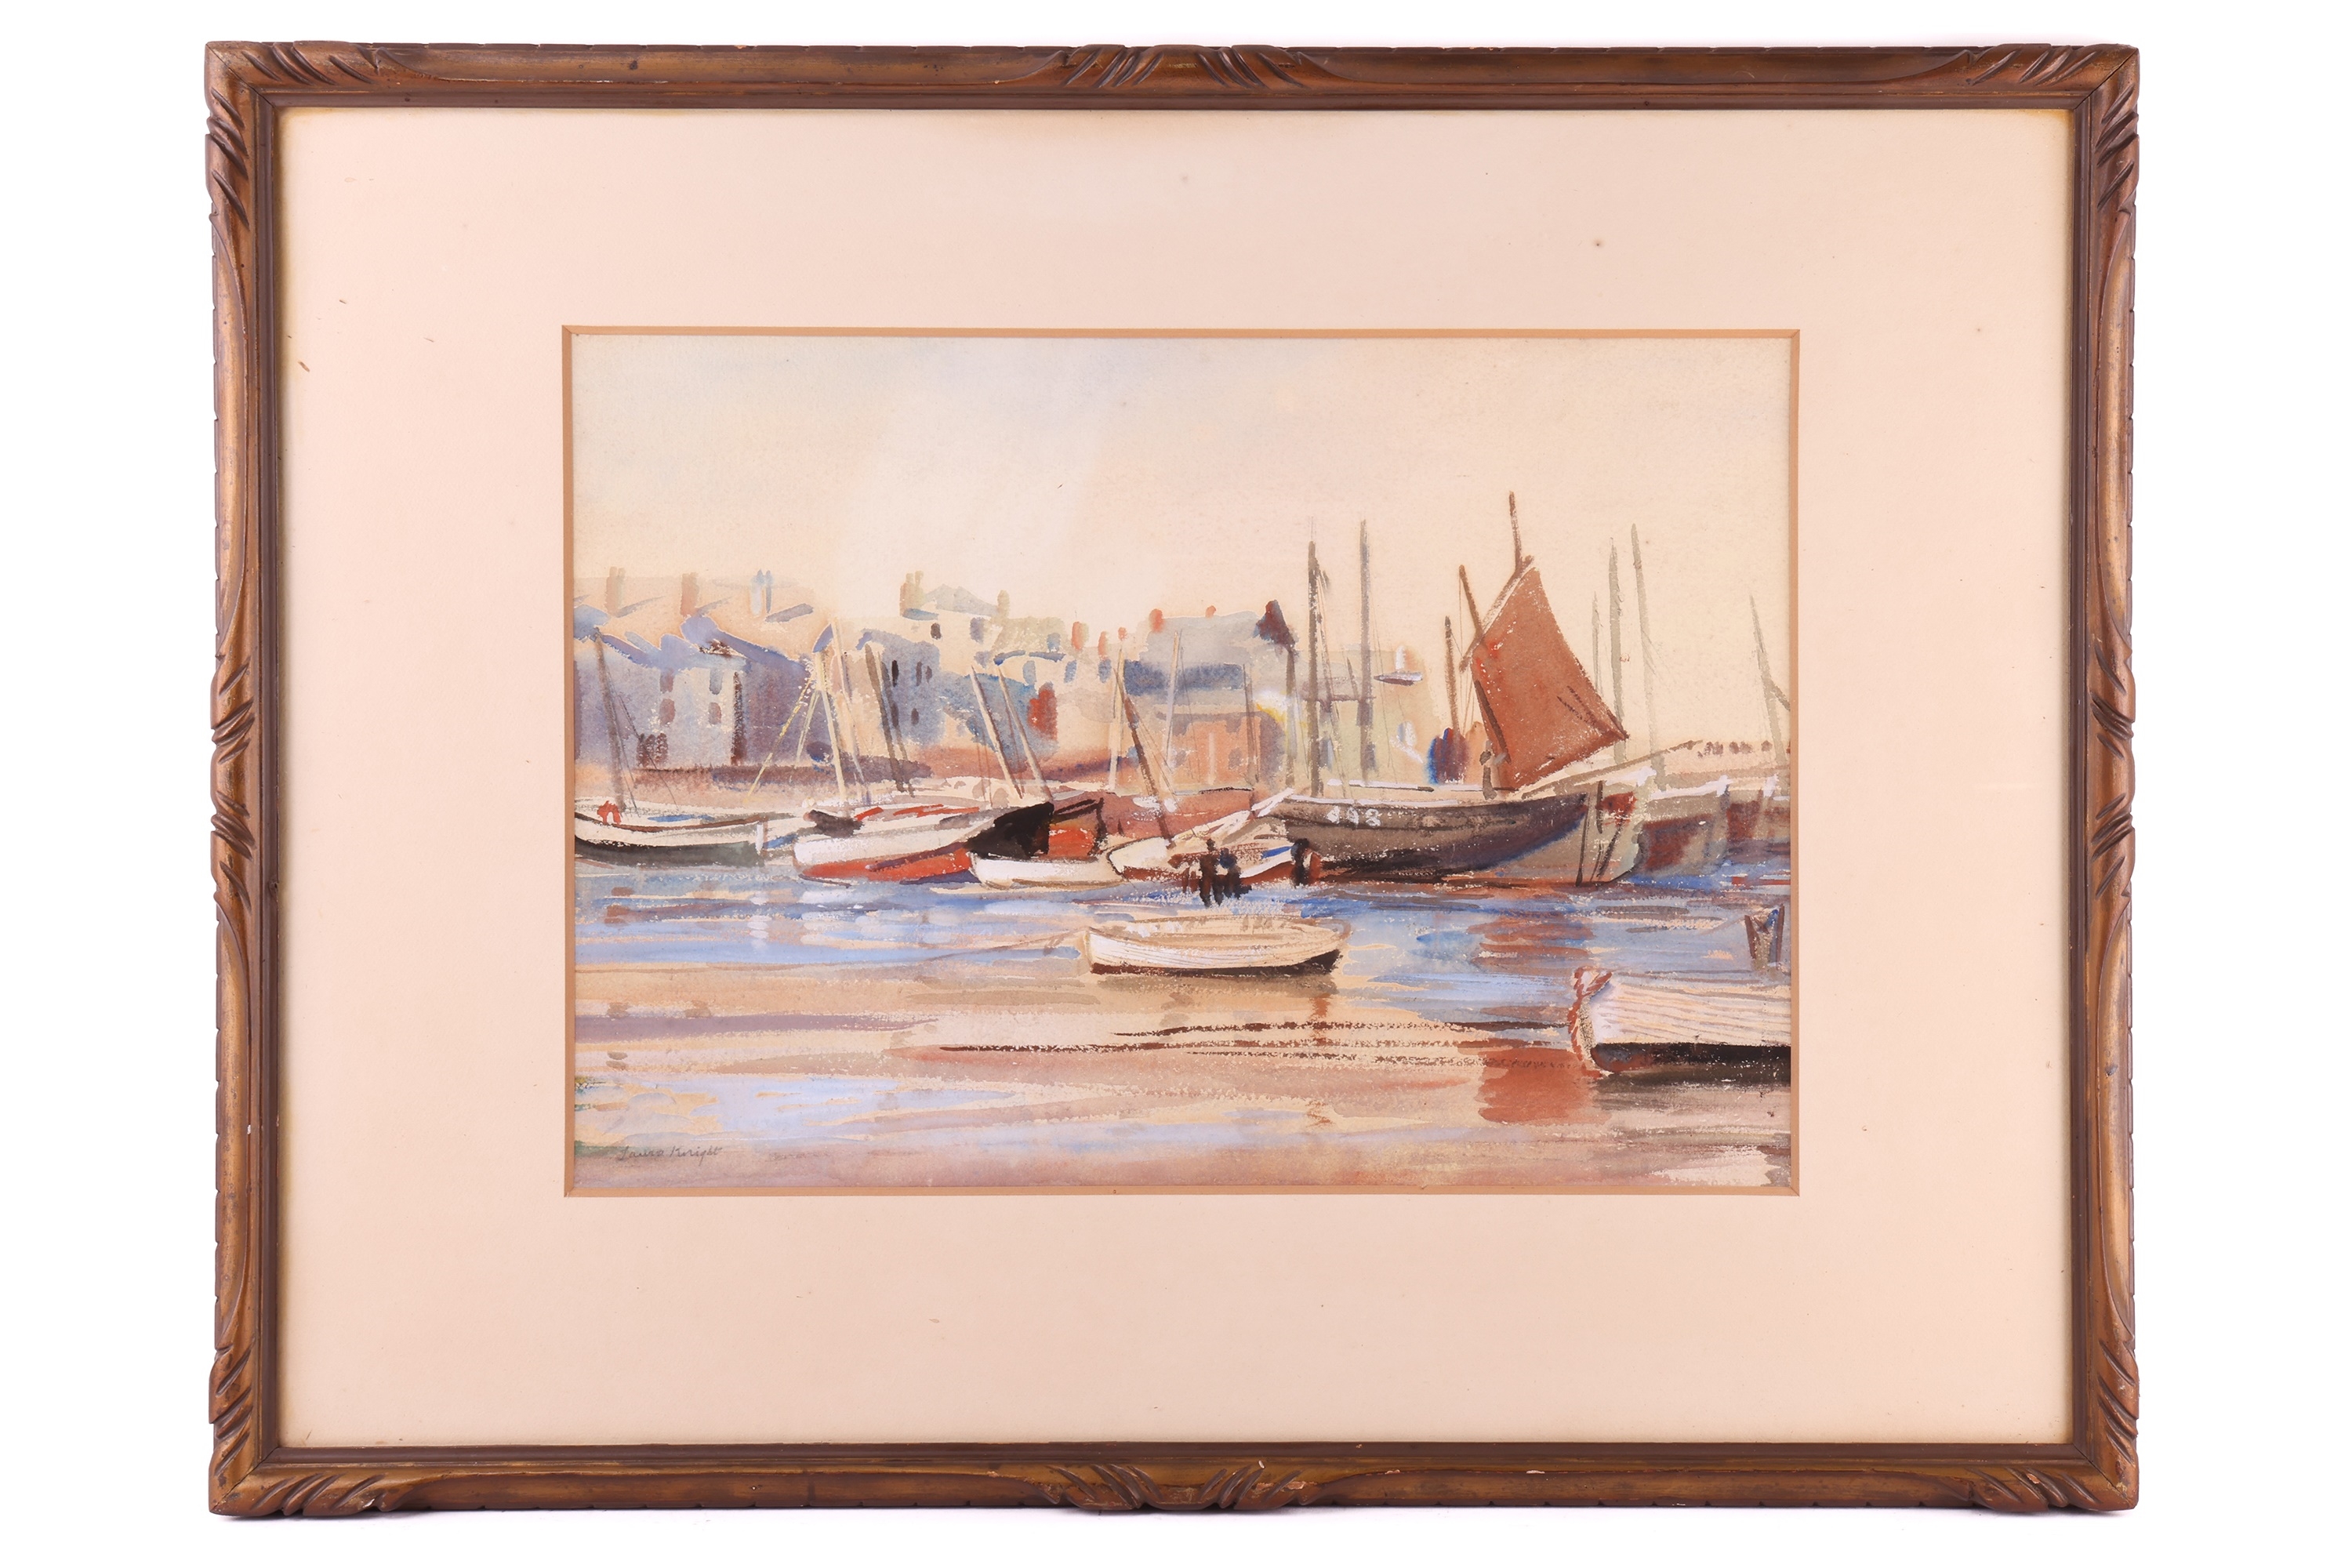 No. 1 Fishing Boats' - a harbour scene - Dame Laura Knight